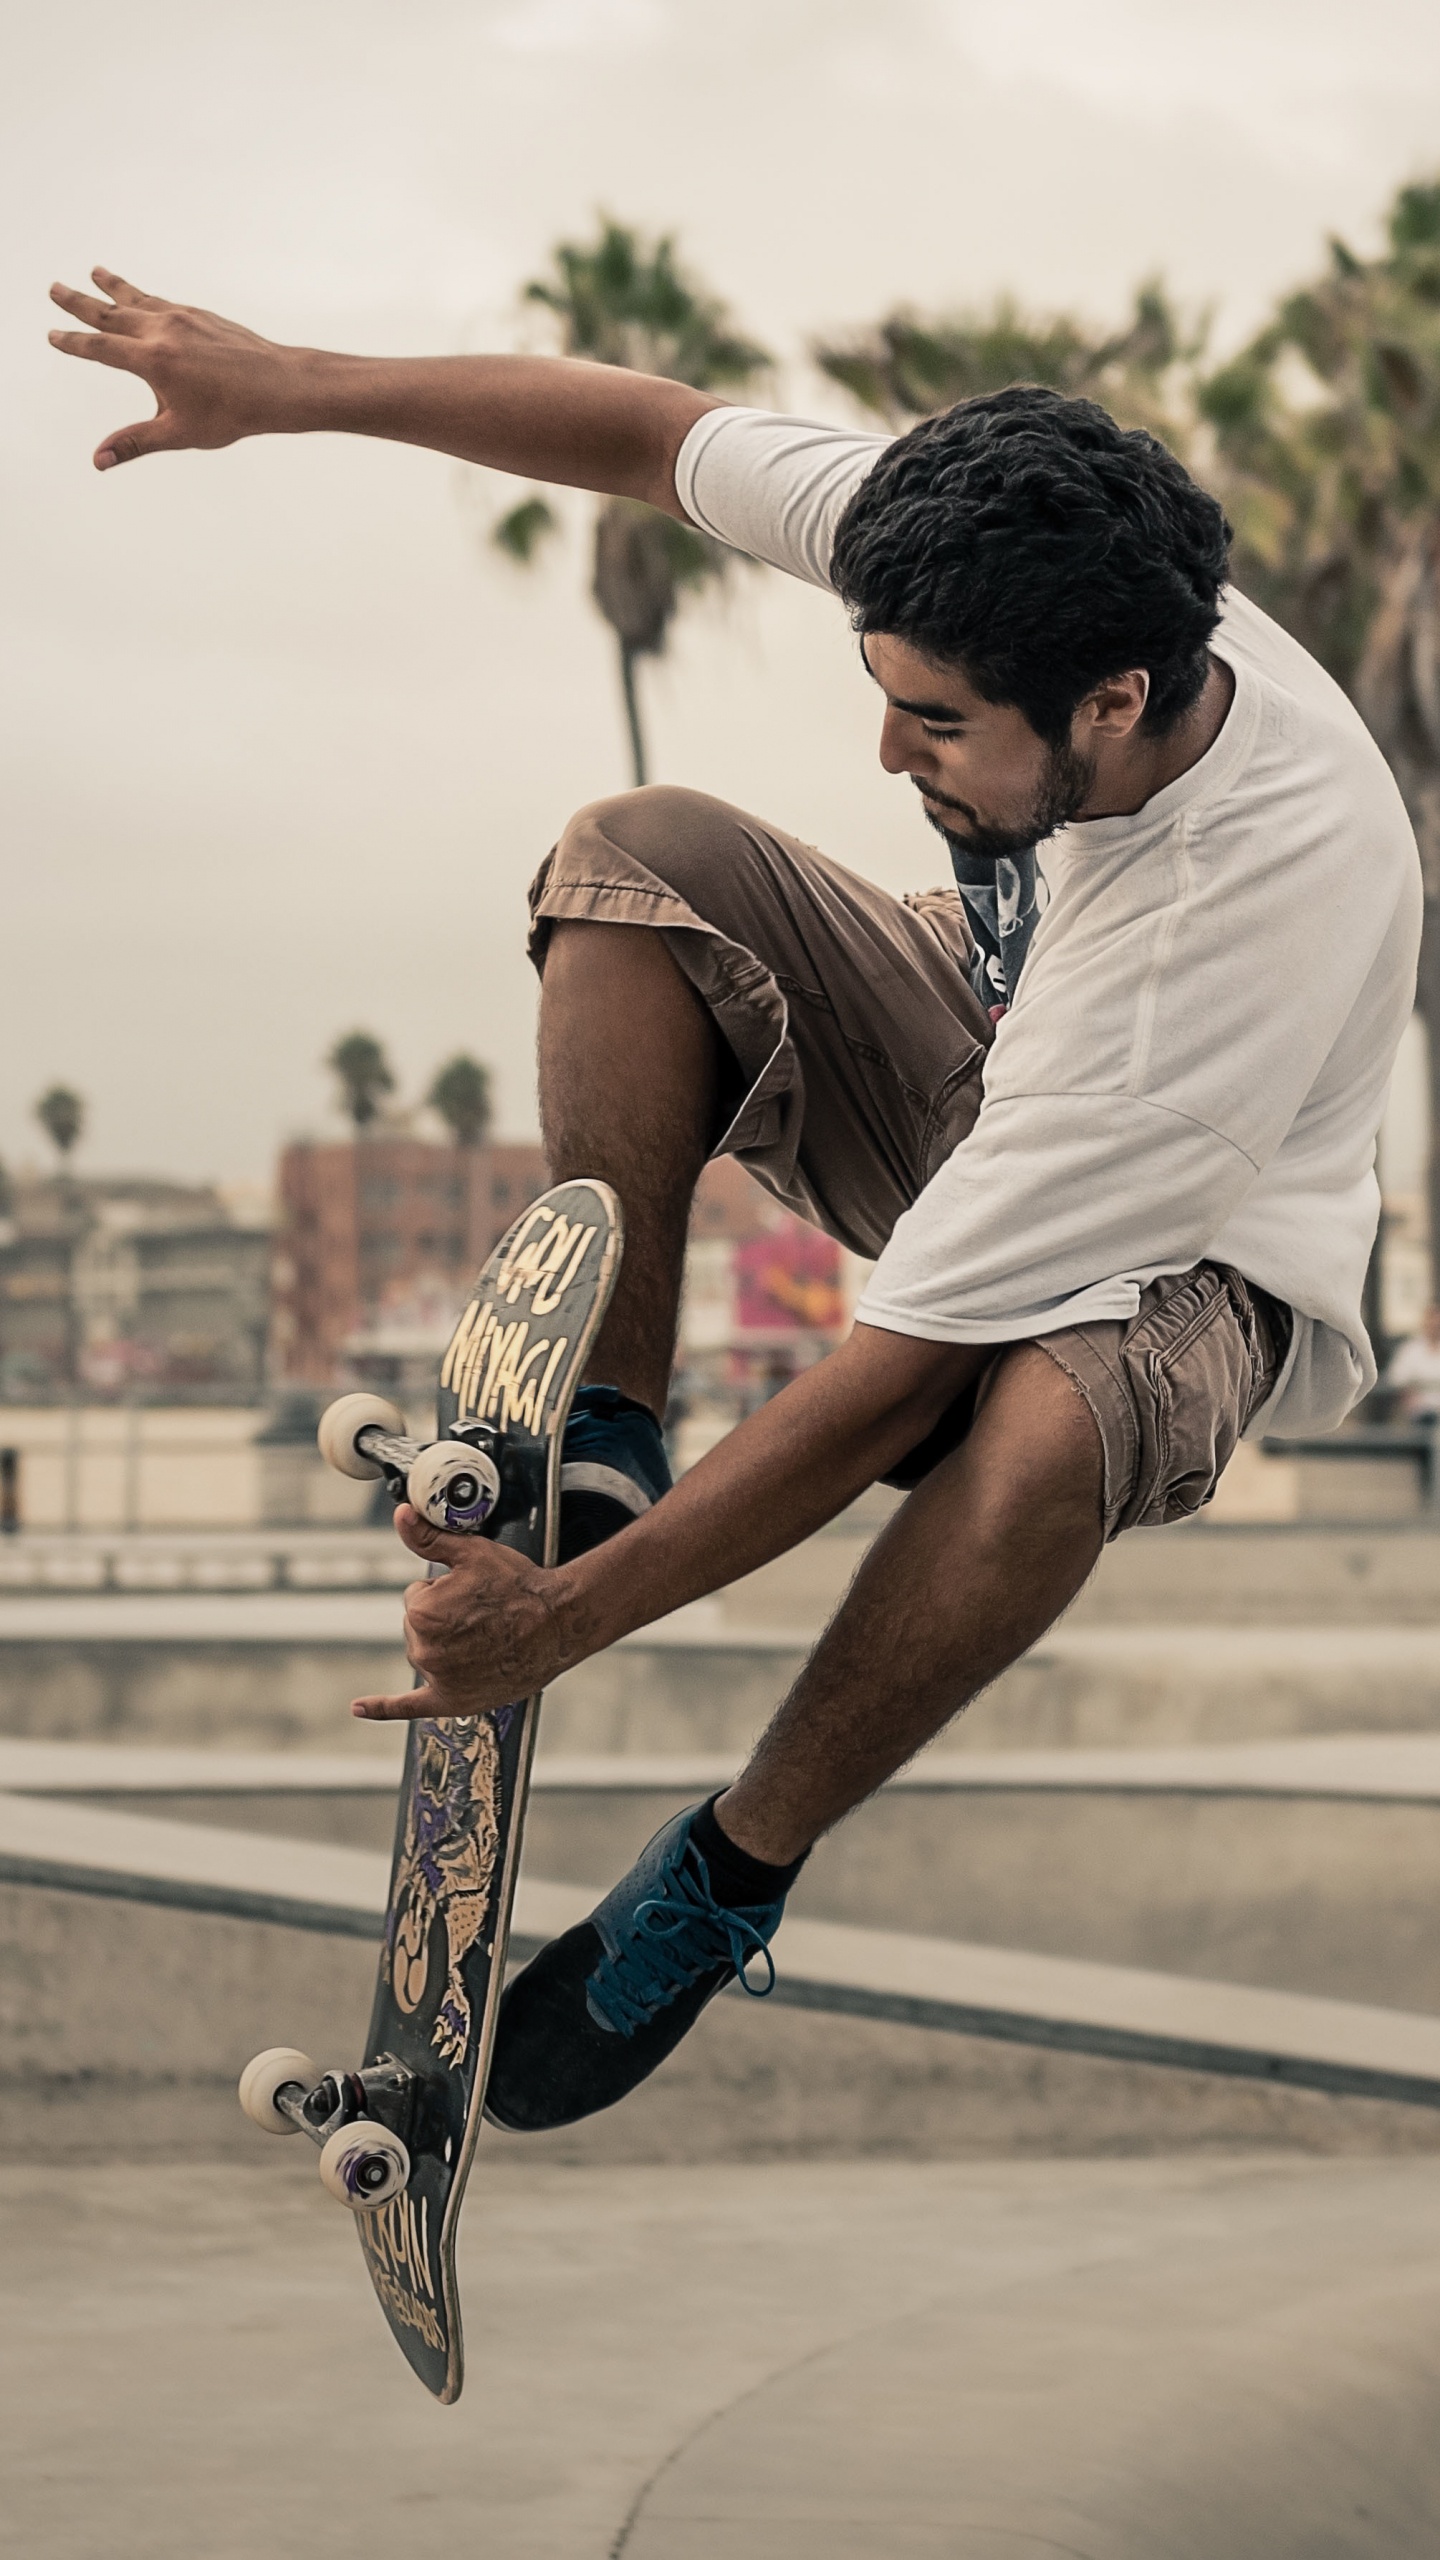 Man in White T-shirt and Brown Shorts Playing Skateboard During Daytime. Wallpaper in 1440x2560 Resolution